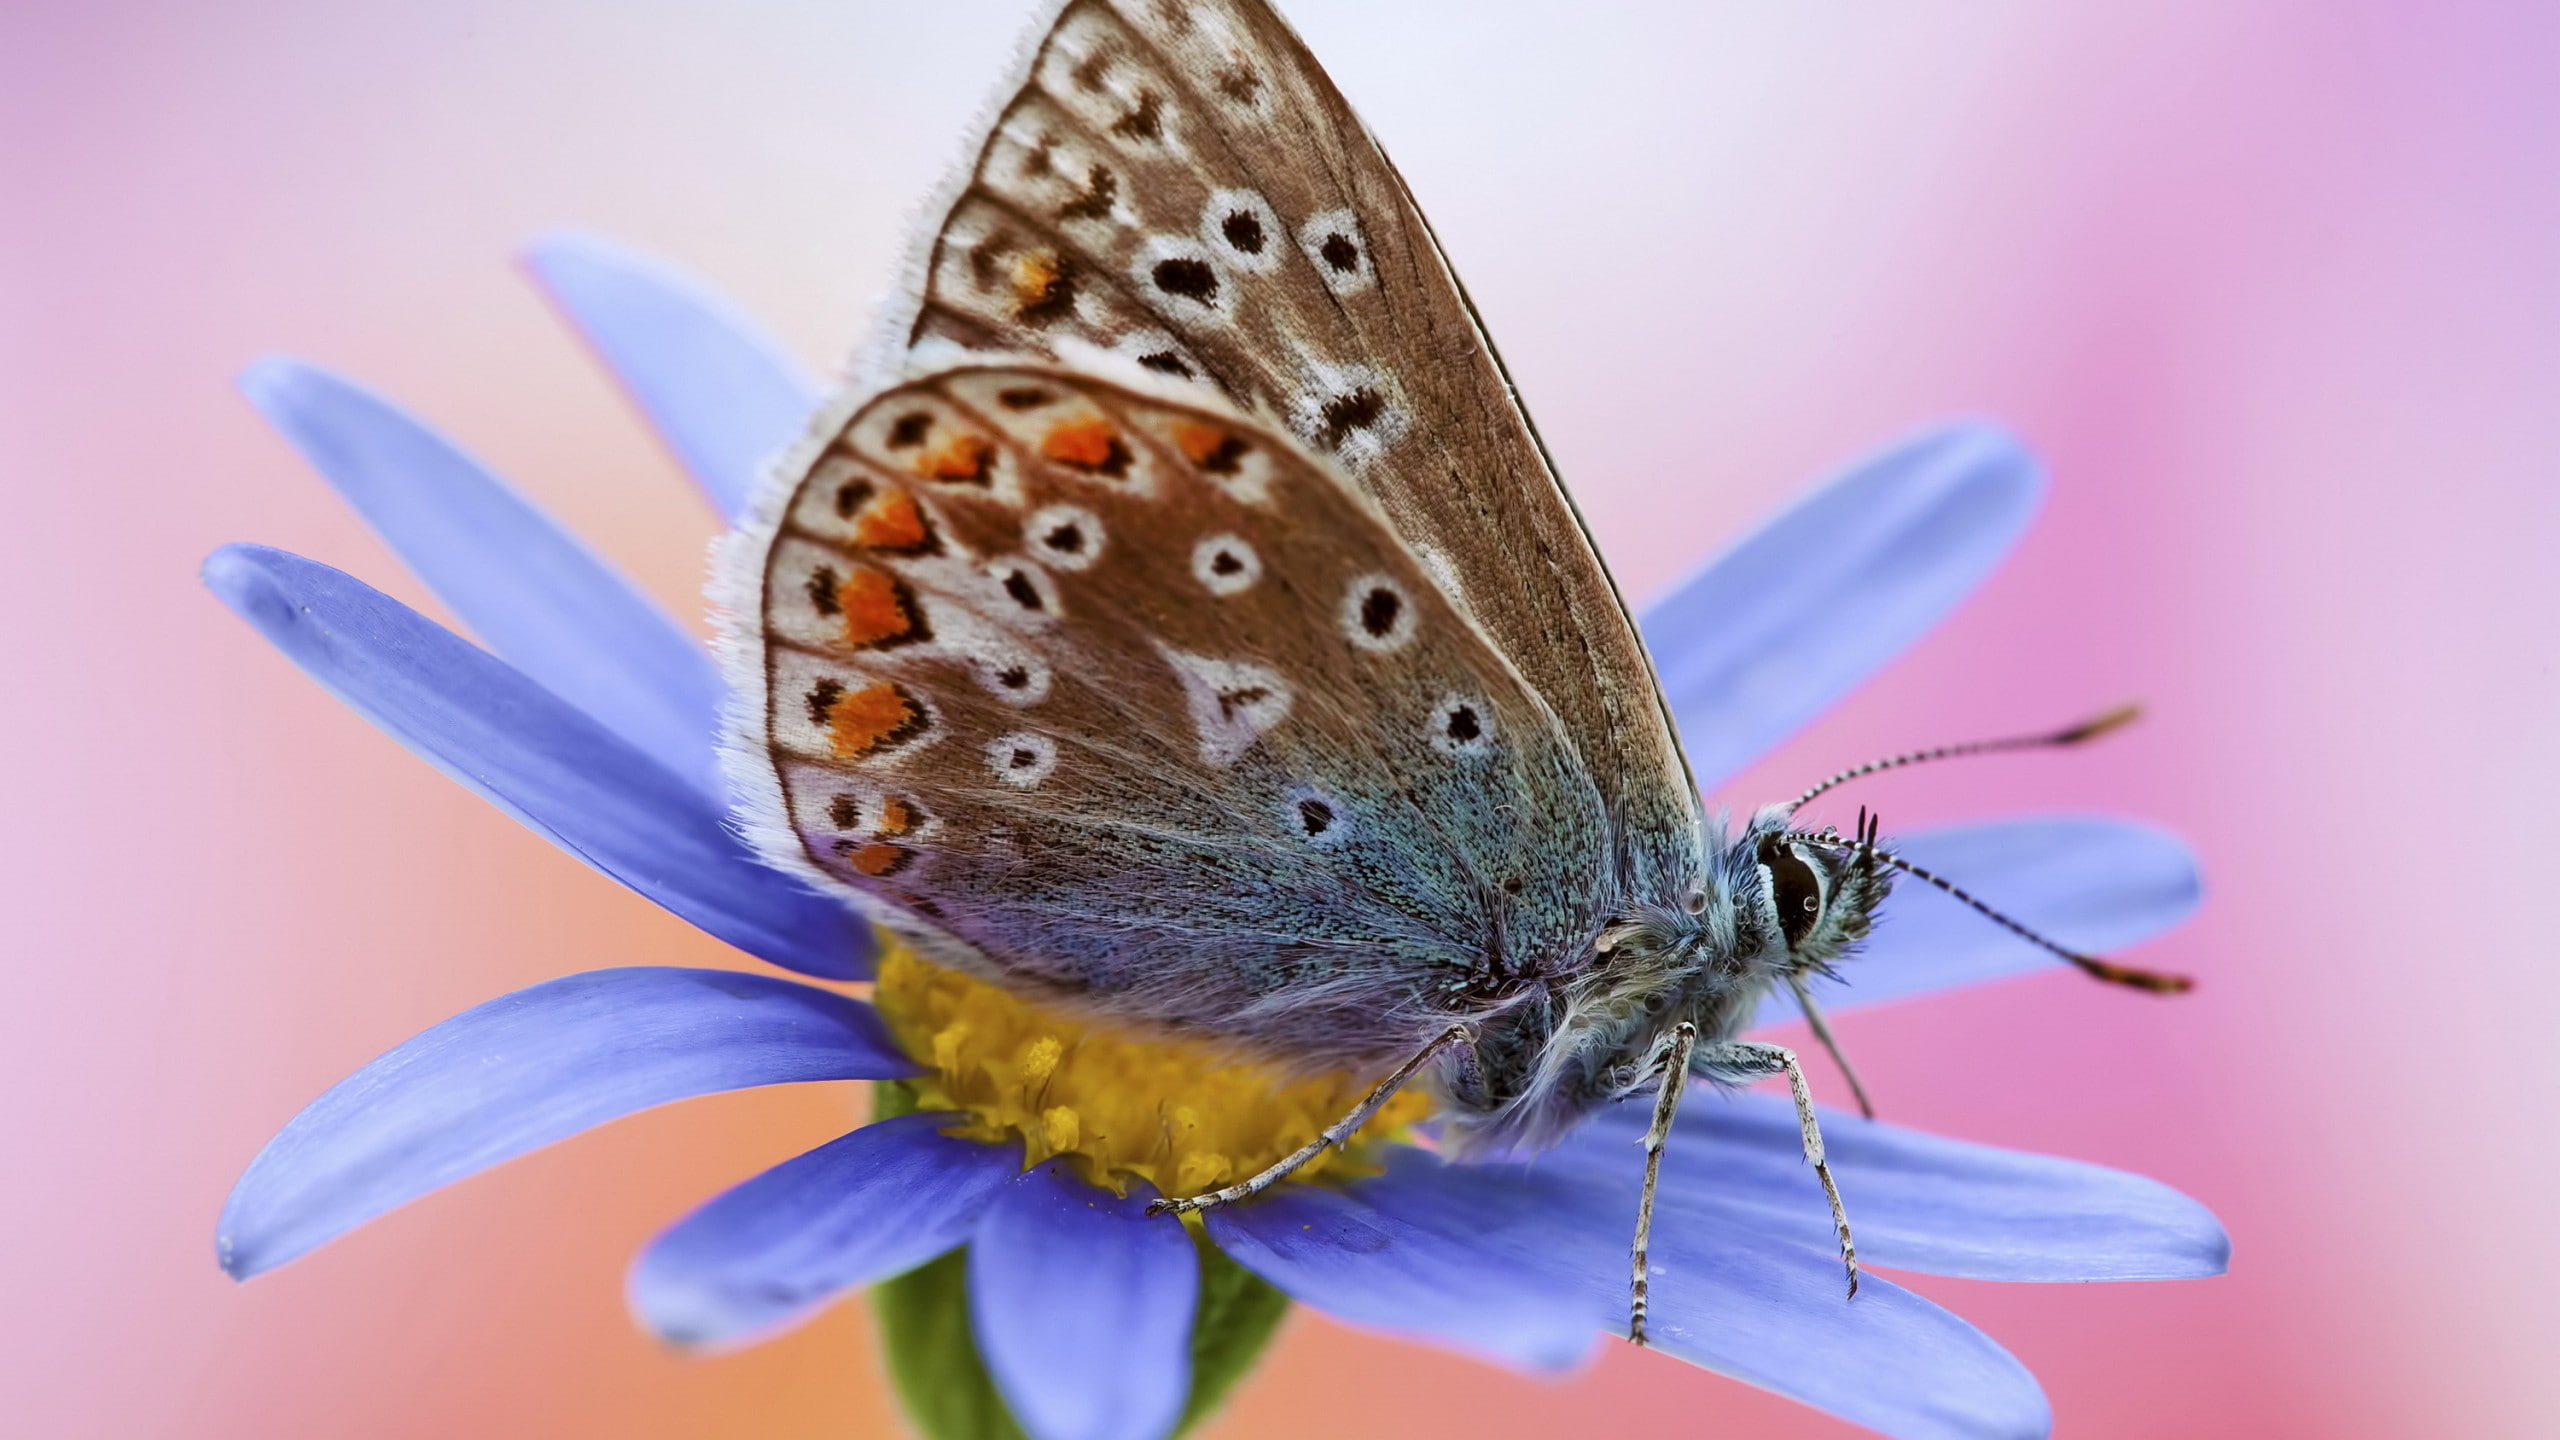 common blue butterfly perched on blue petaled flower, Artemis